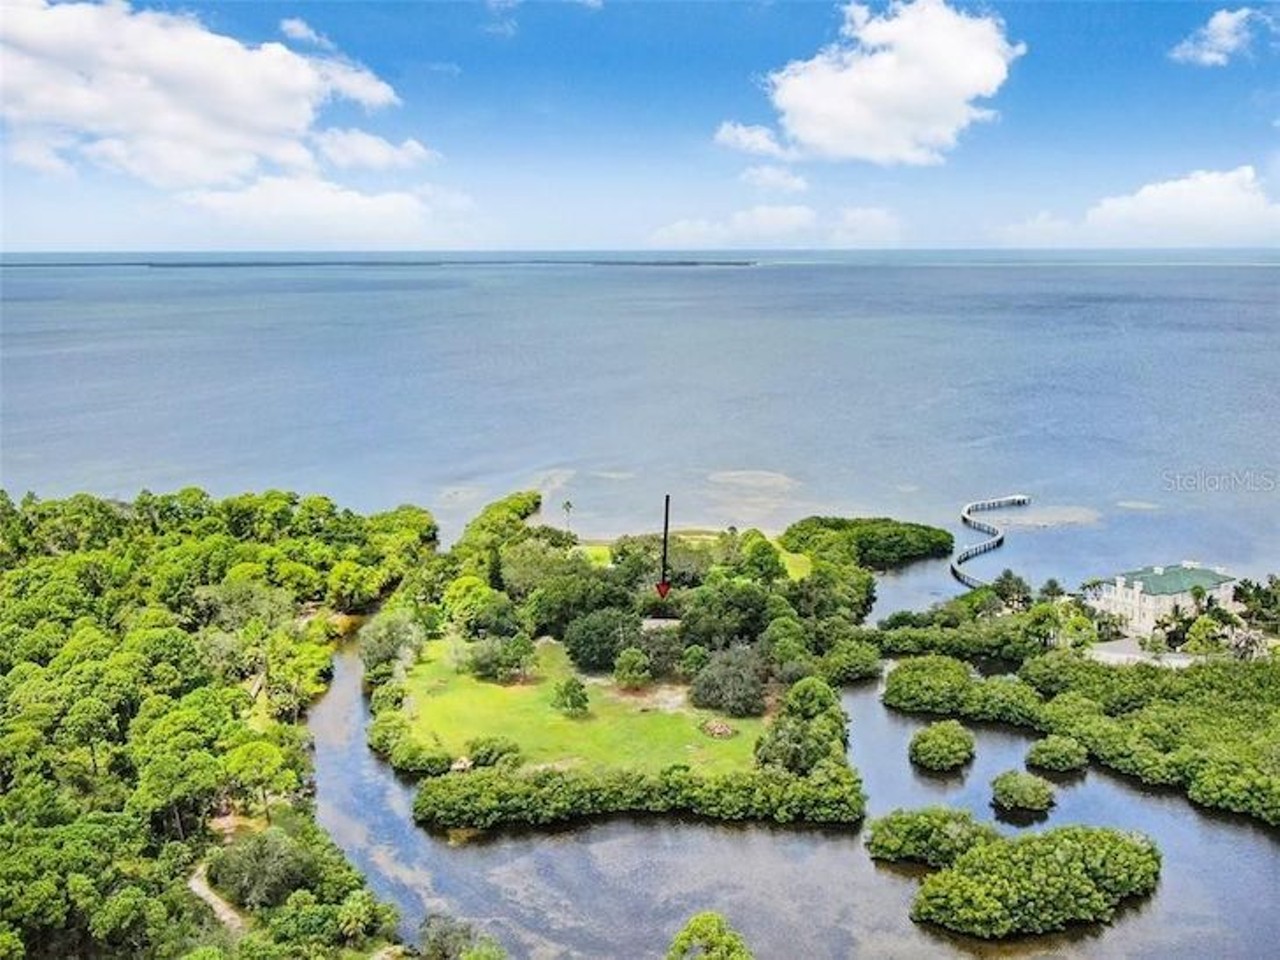 A Tampa Bay private island is now on the market for the first time in over 50 years